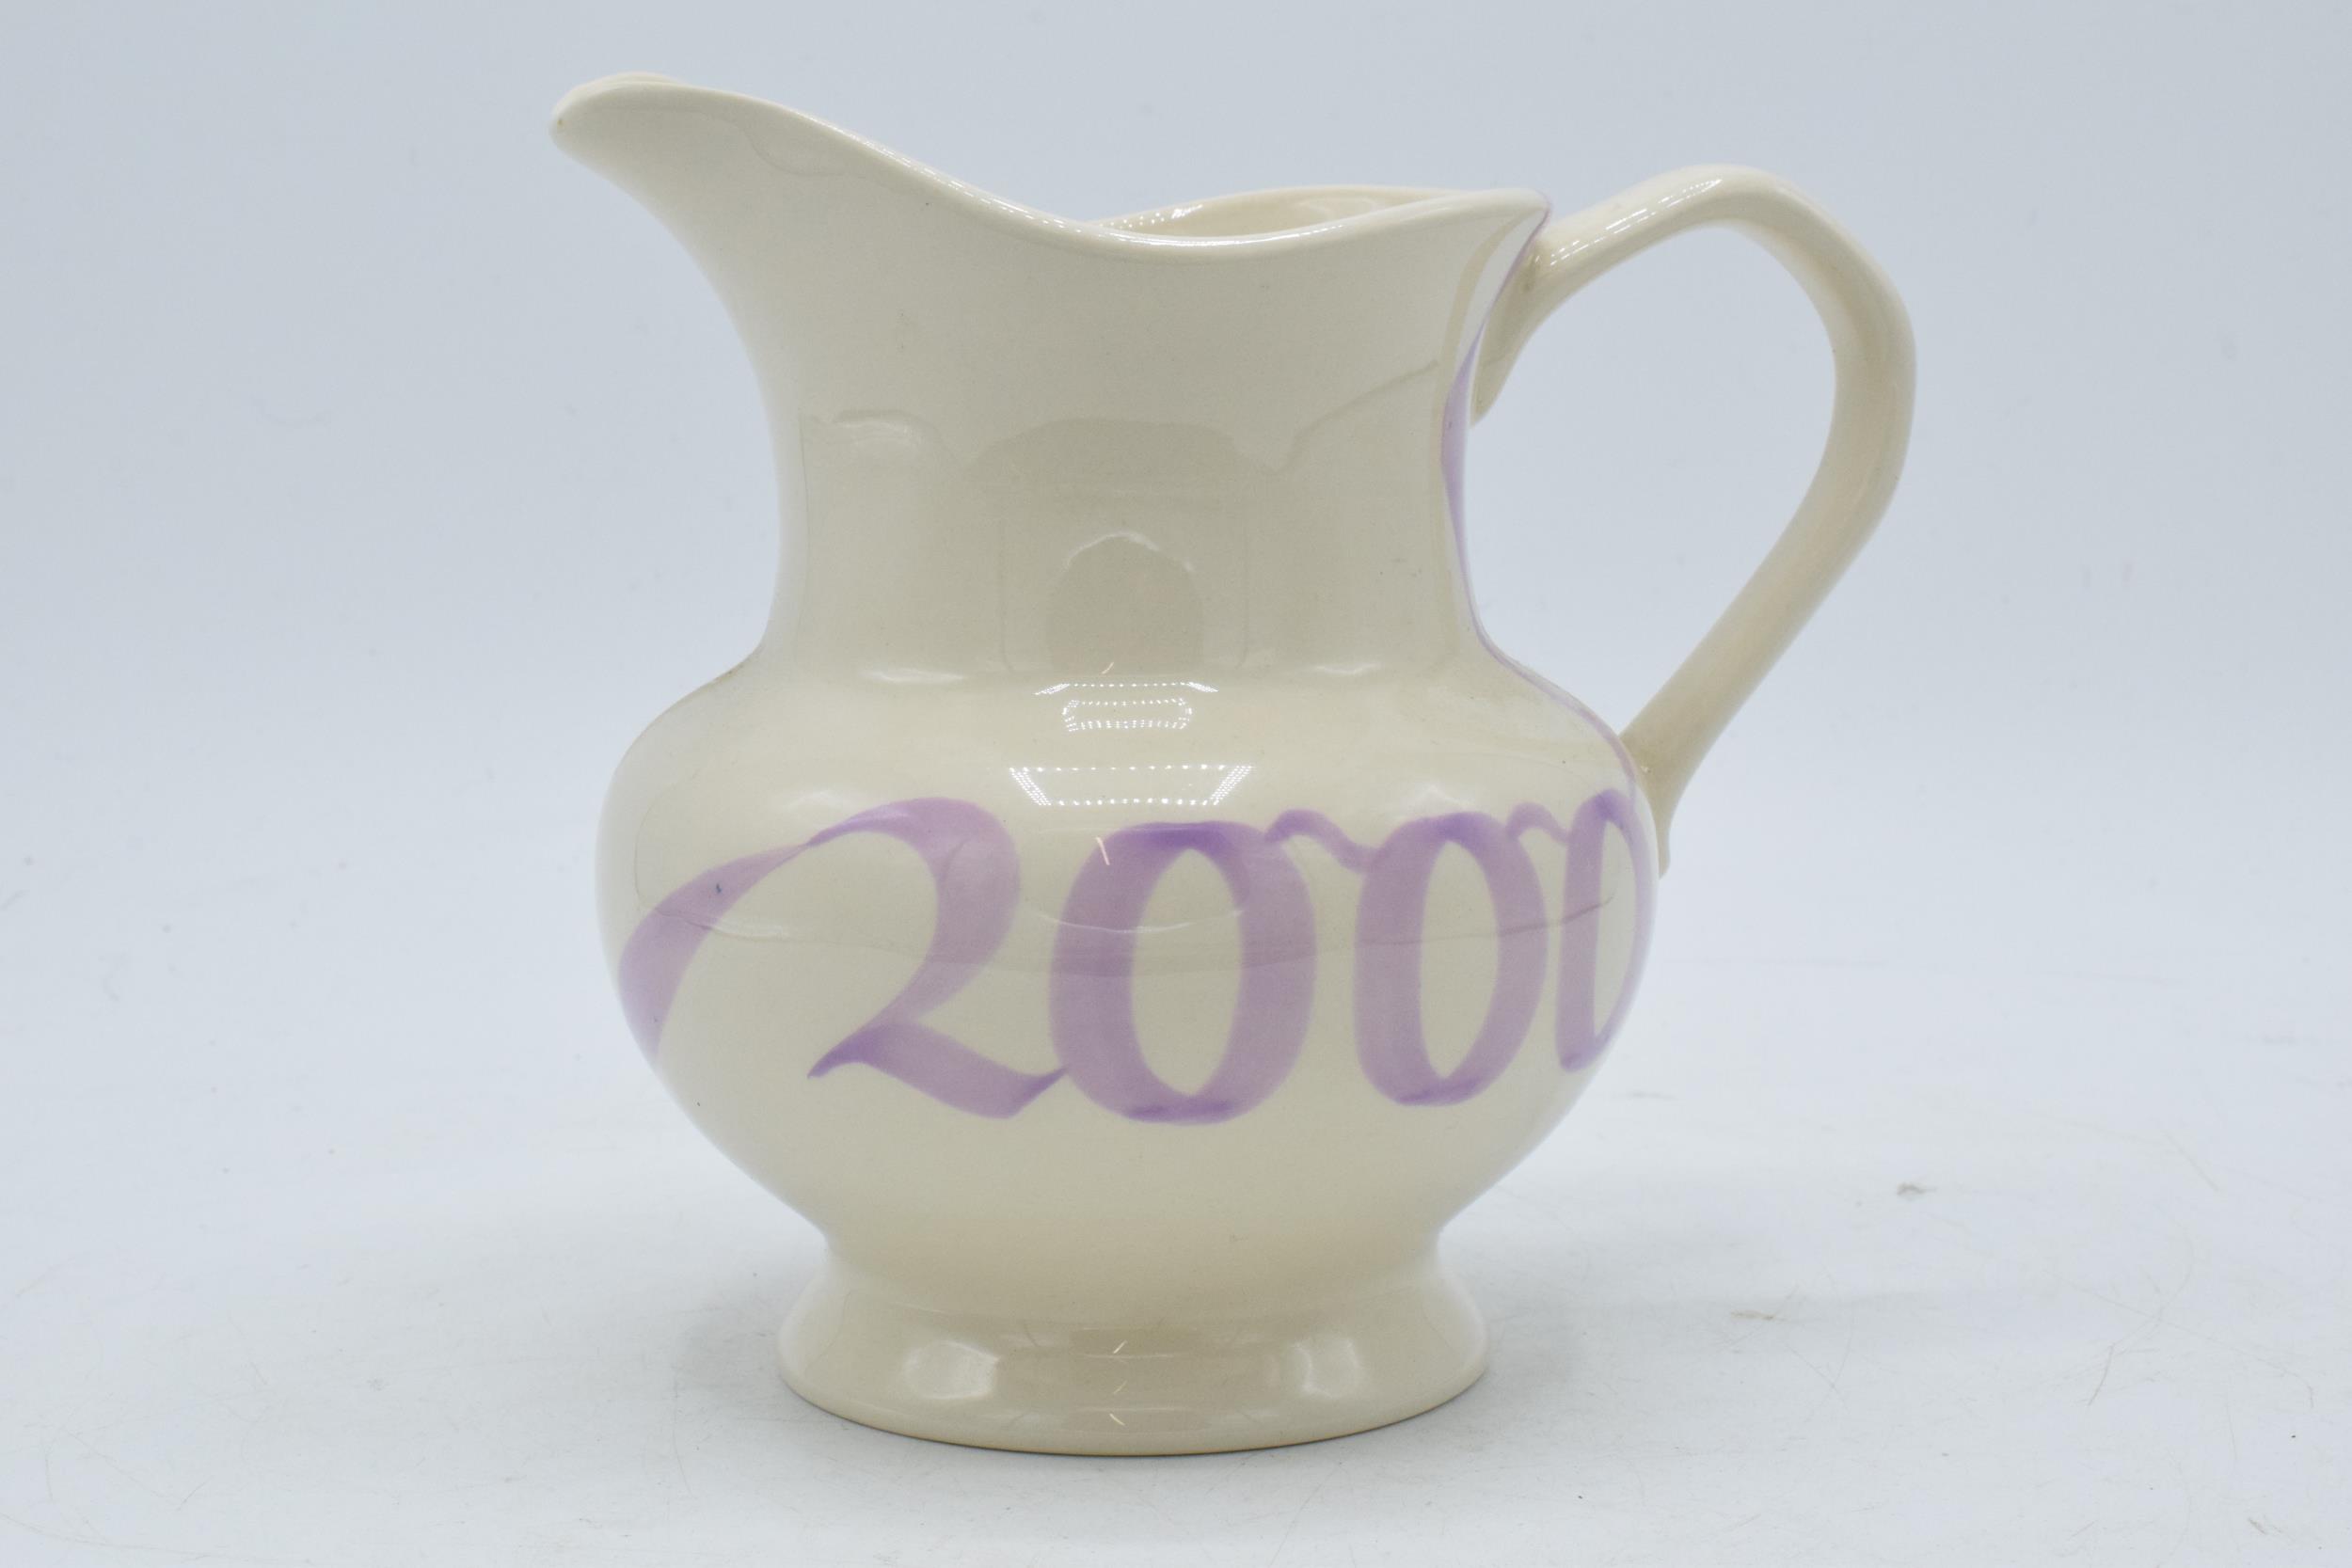 Emma Bridgewater Millenium '2000' pottery jug, 14cm tall. In good condition with no obvious damage